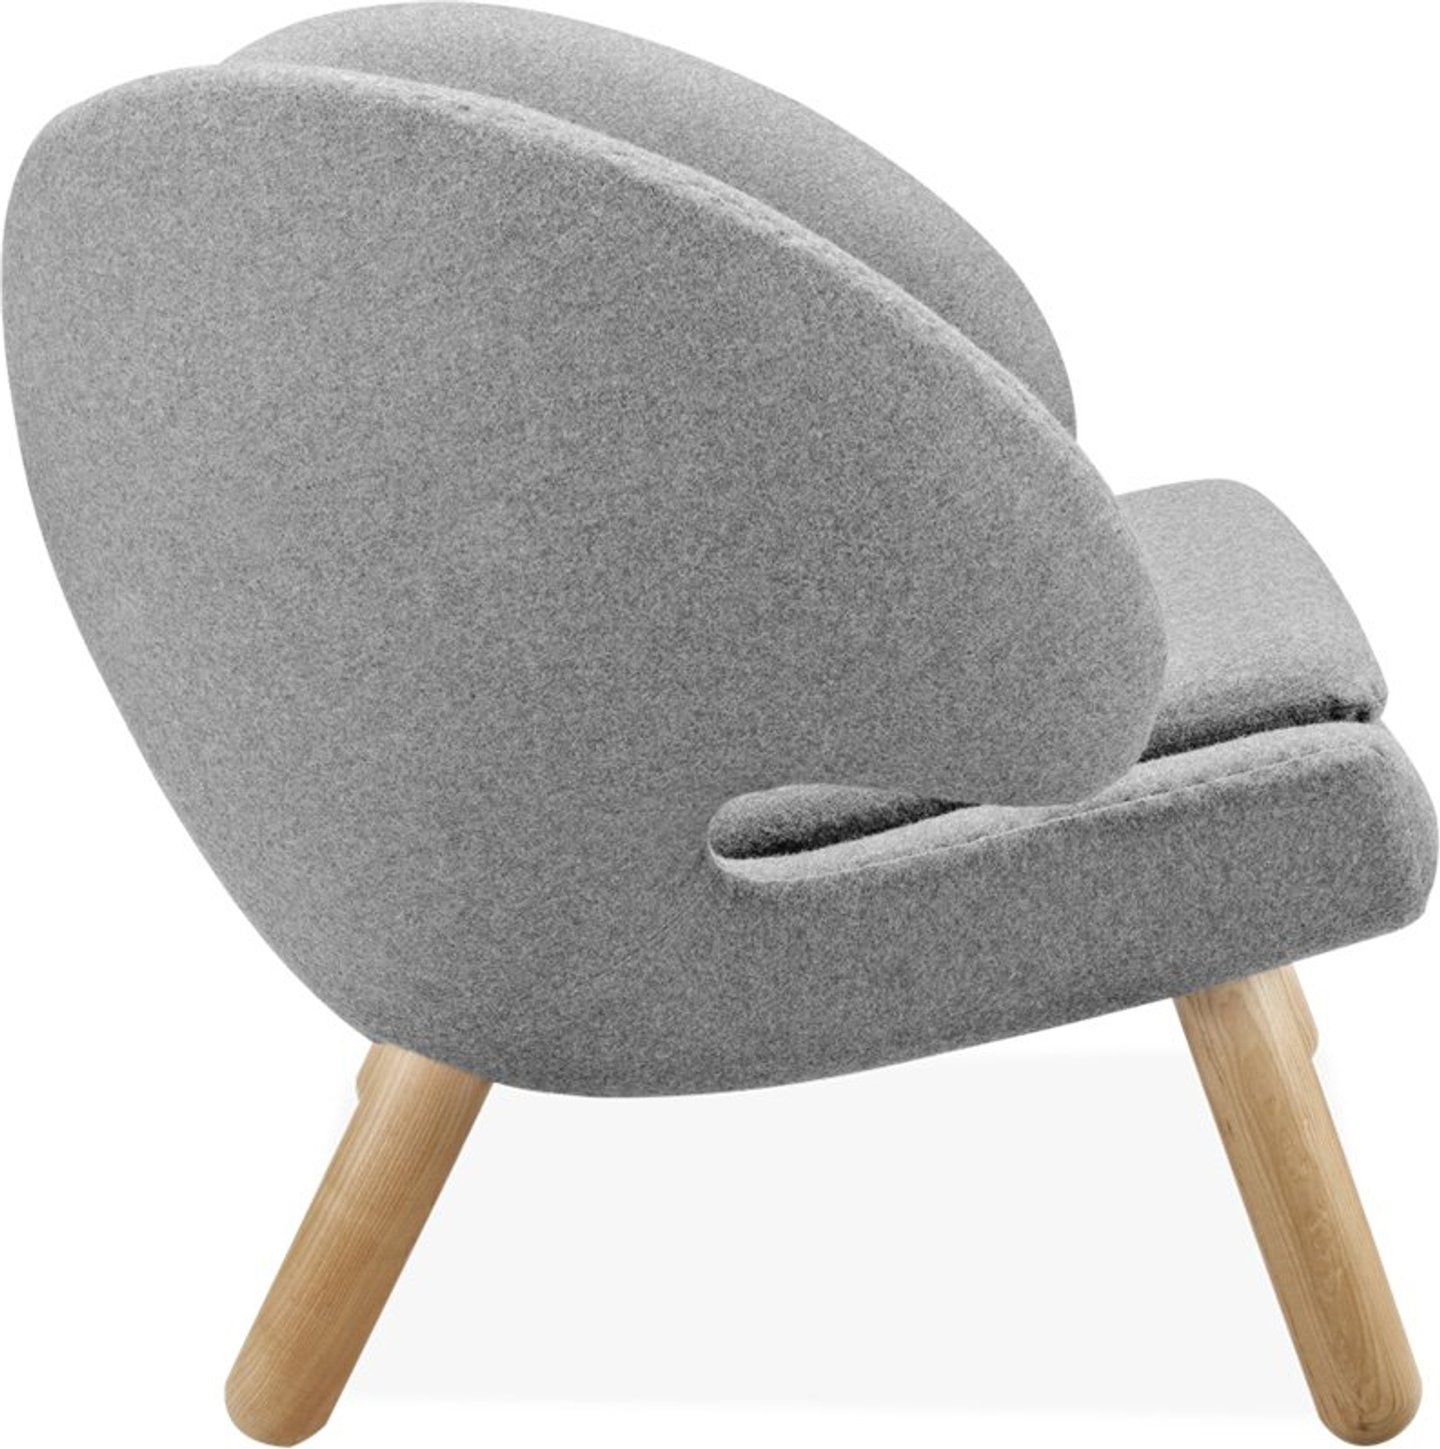 Chaise Pélican Light Pebble Grey image.